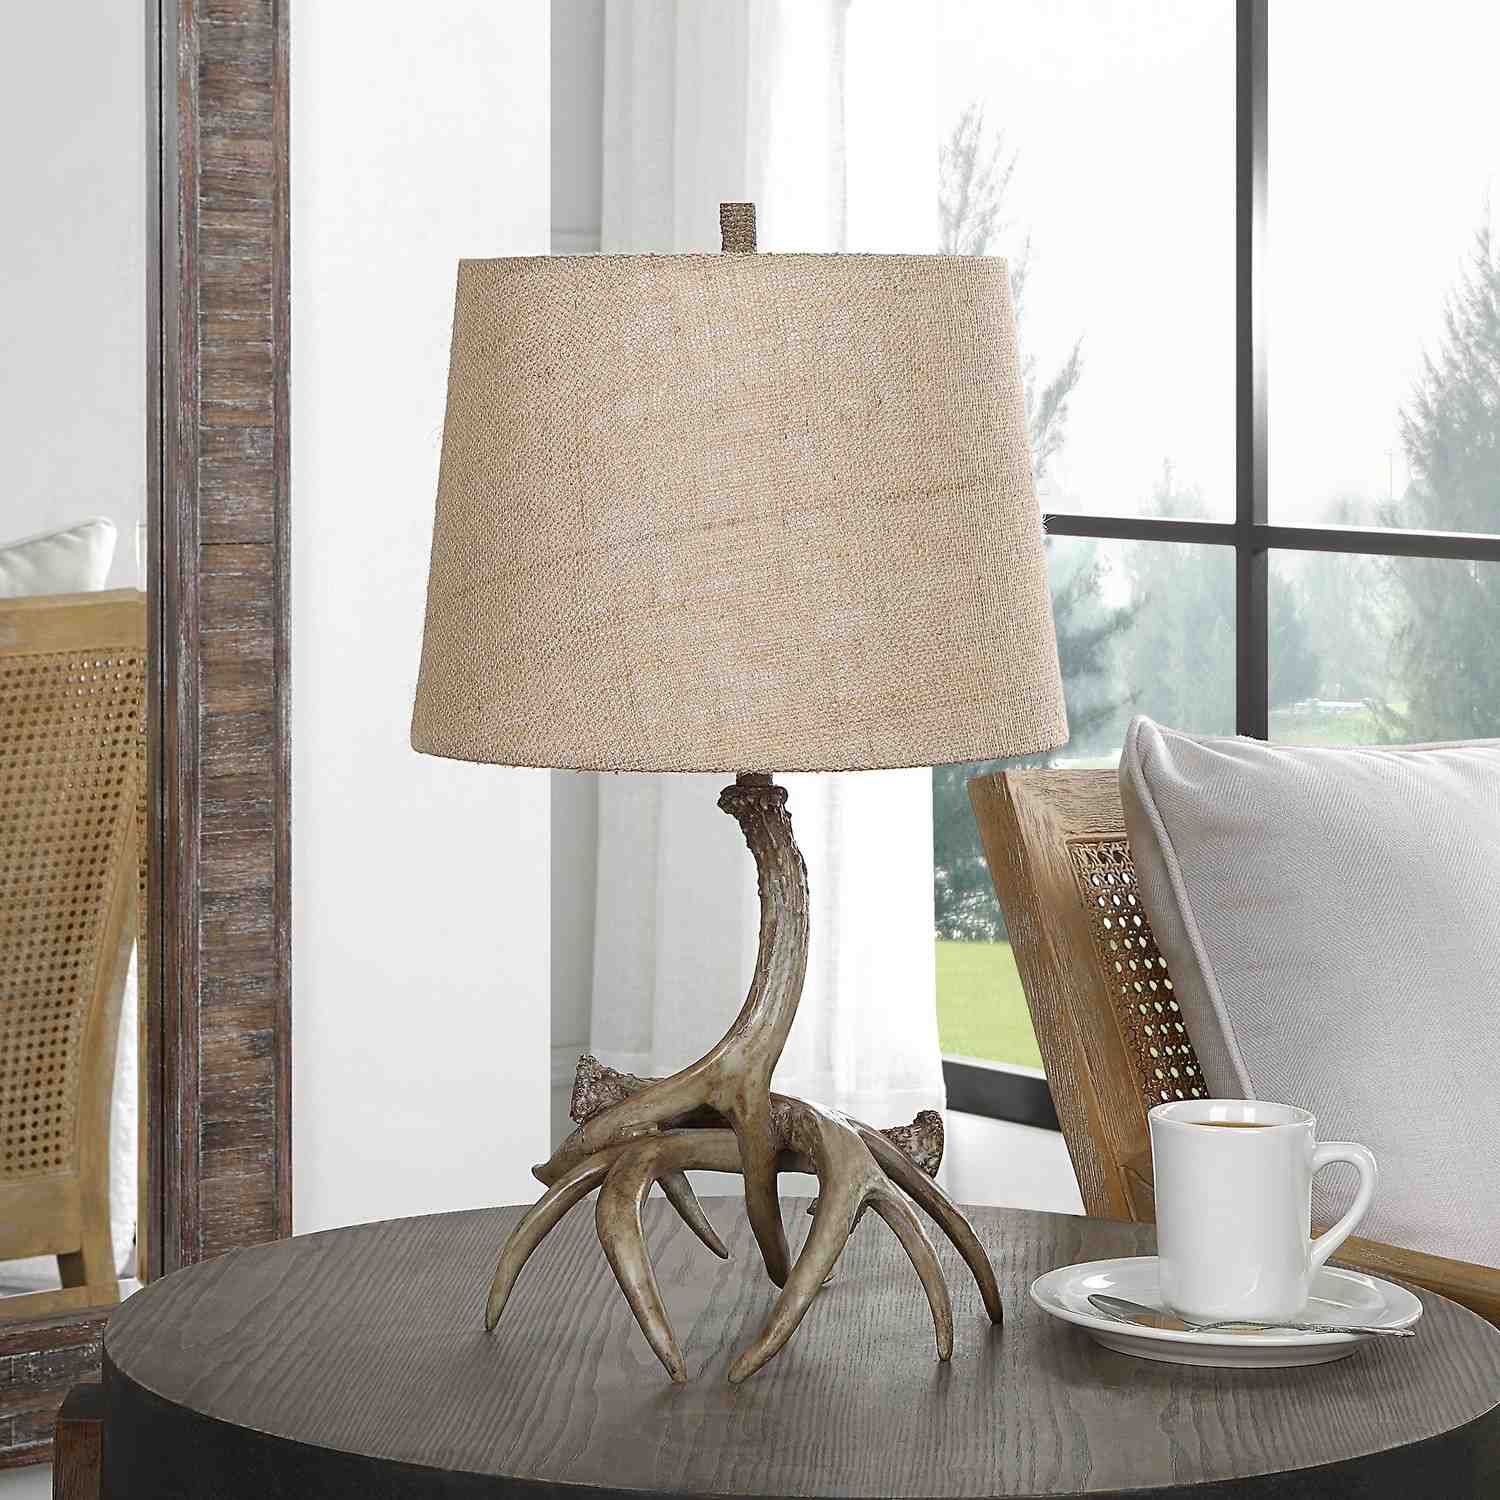 Uttermost W26095-1 Table Lamp - Natural